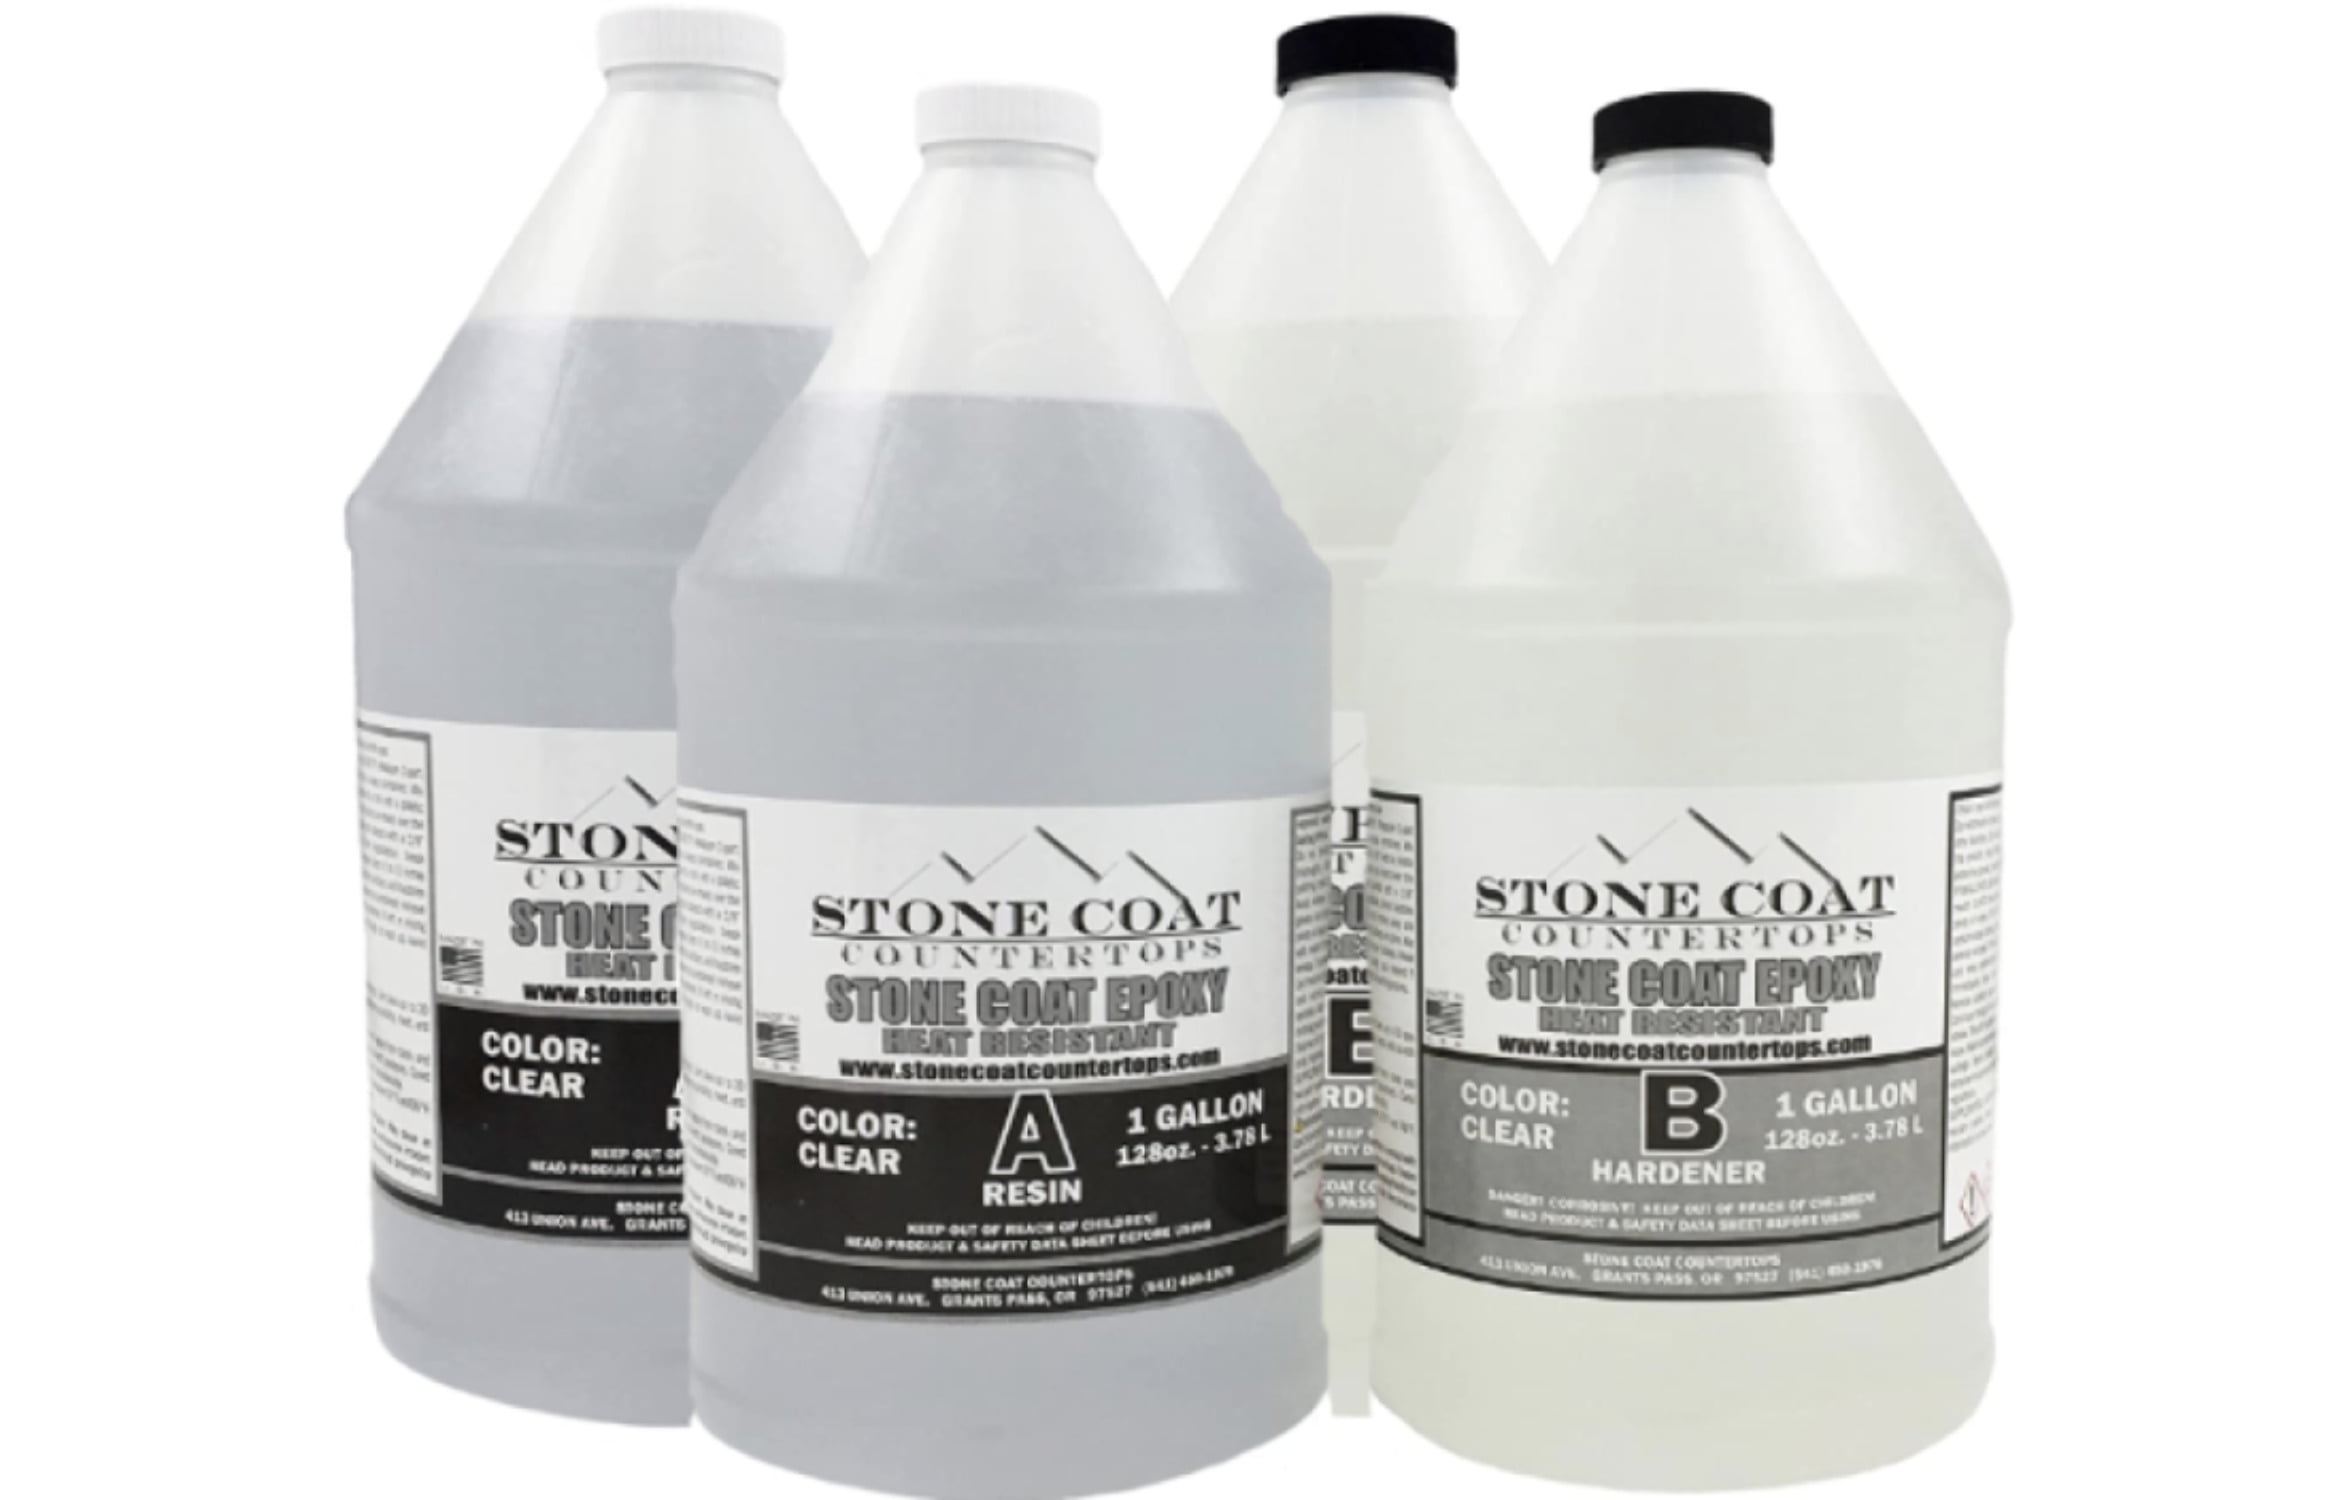 Art 'N Glow Clear Casting And Coating Epoxy Resin - 1 Gallon Kit